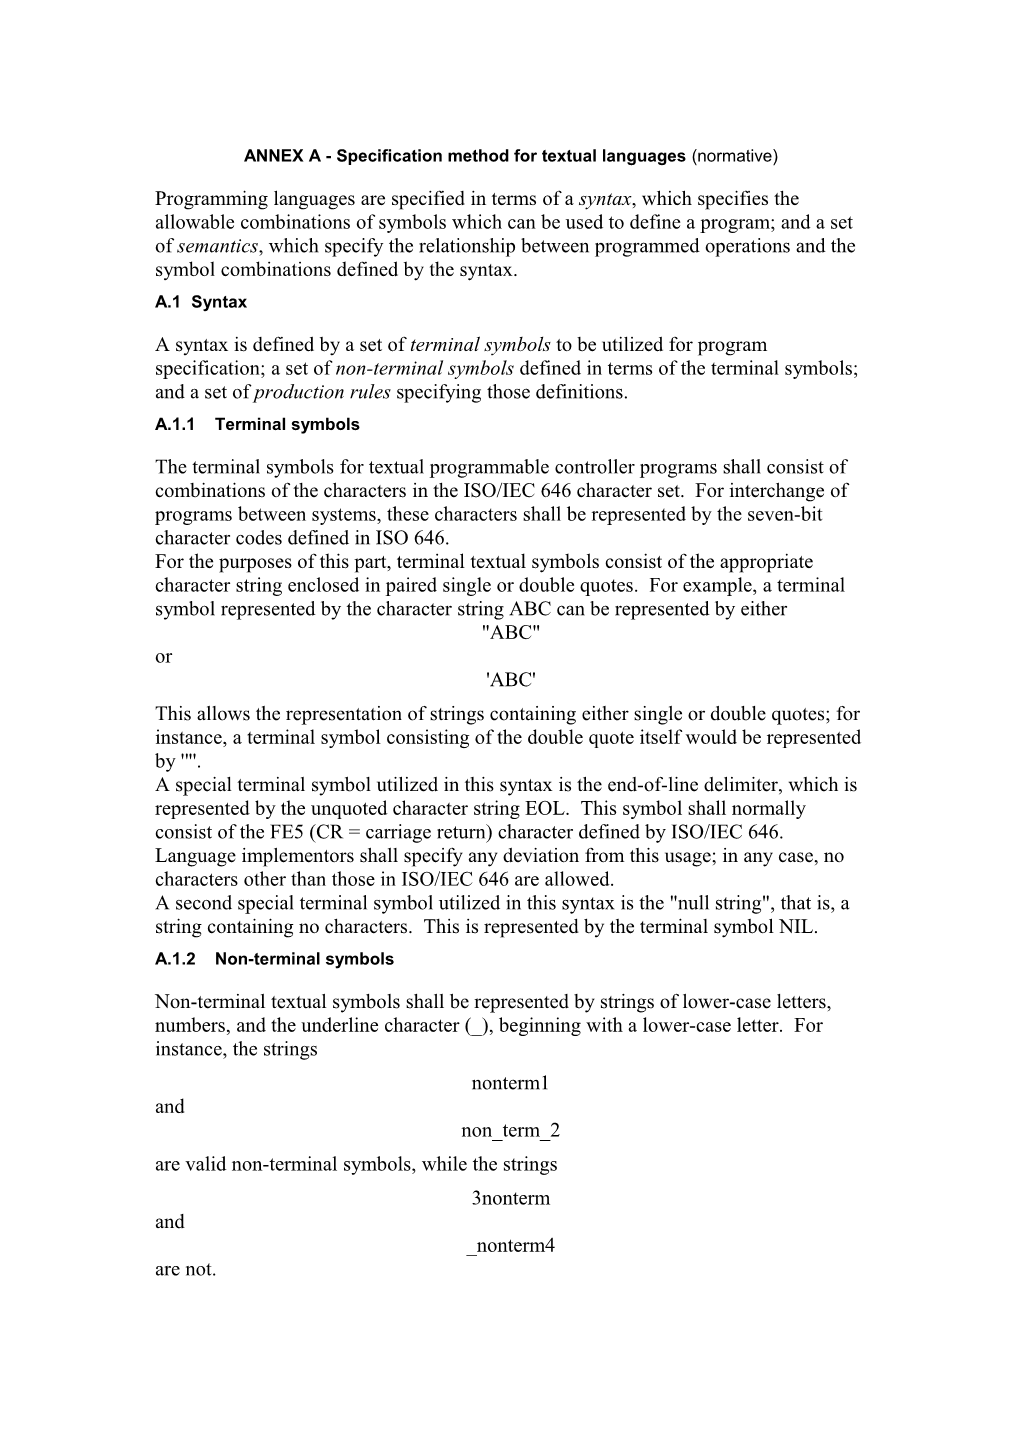 ANNEX a - Specification Method for Textual Languages (Normative)